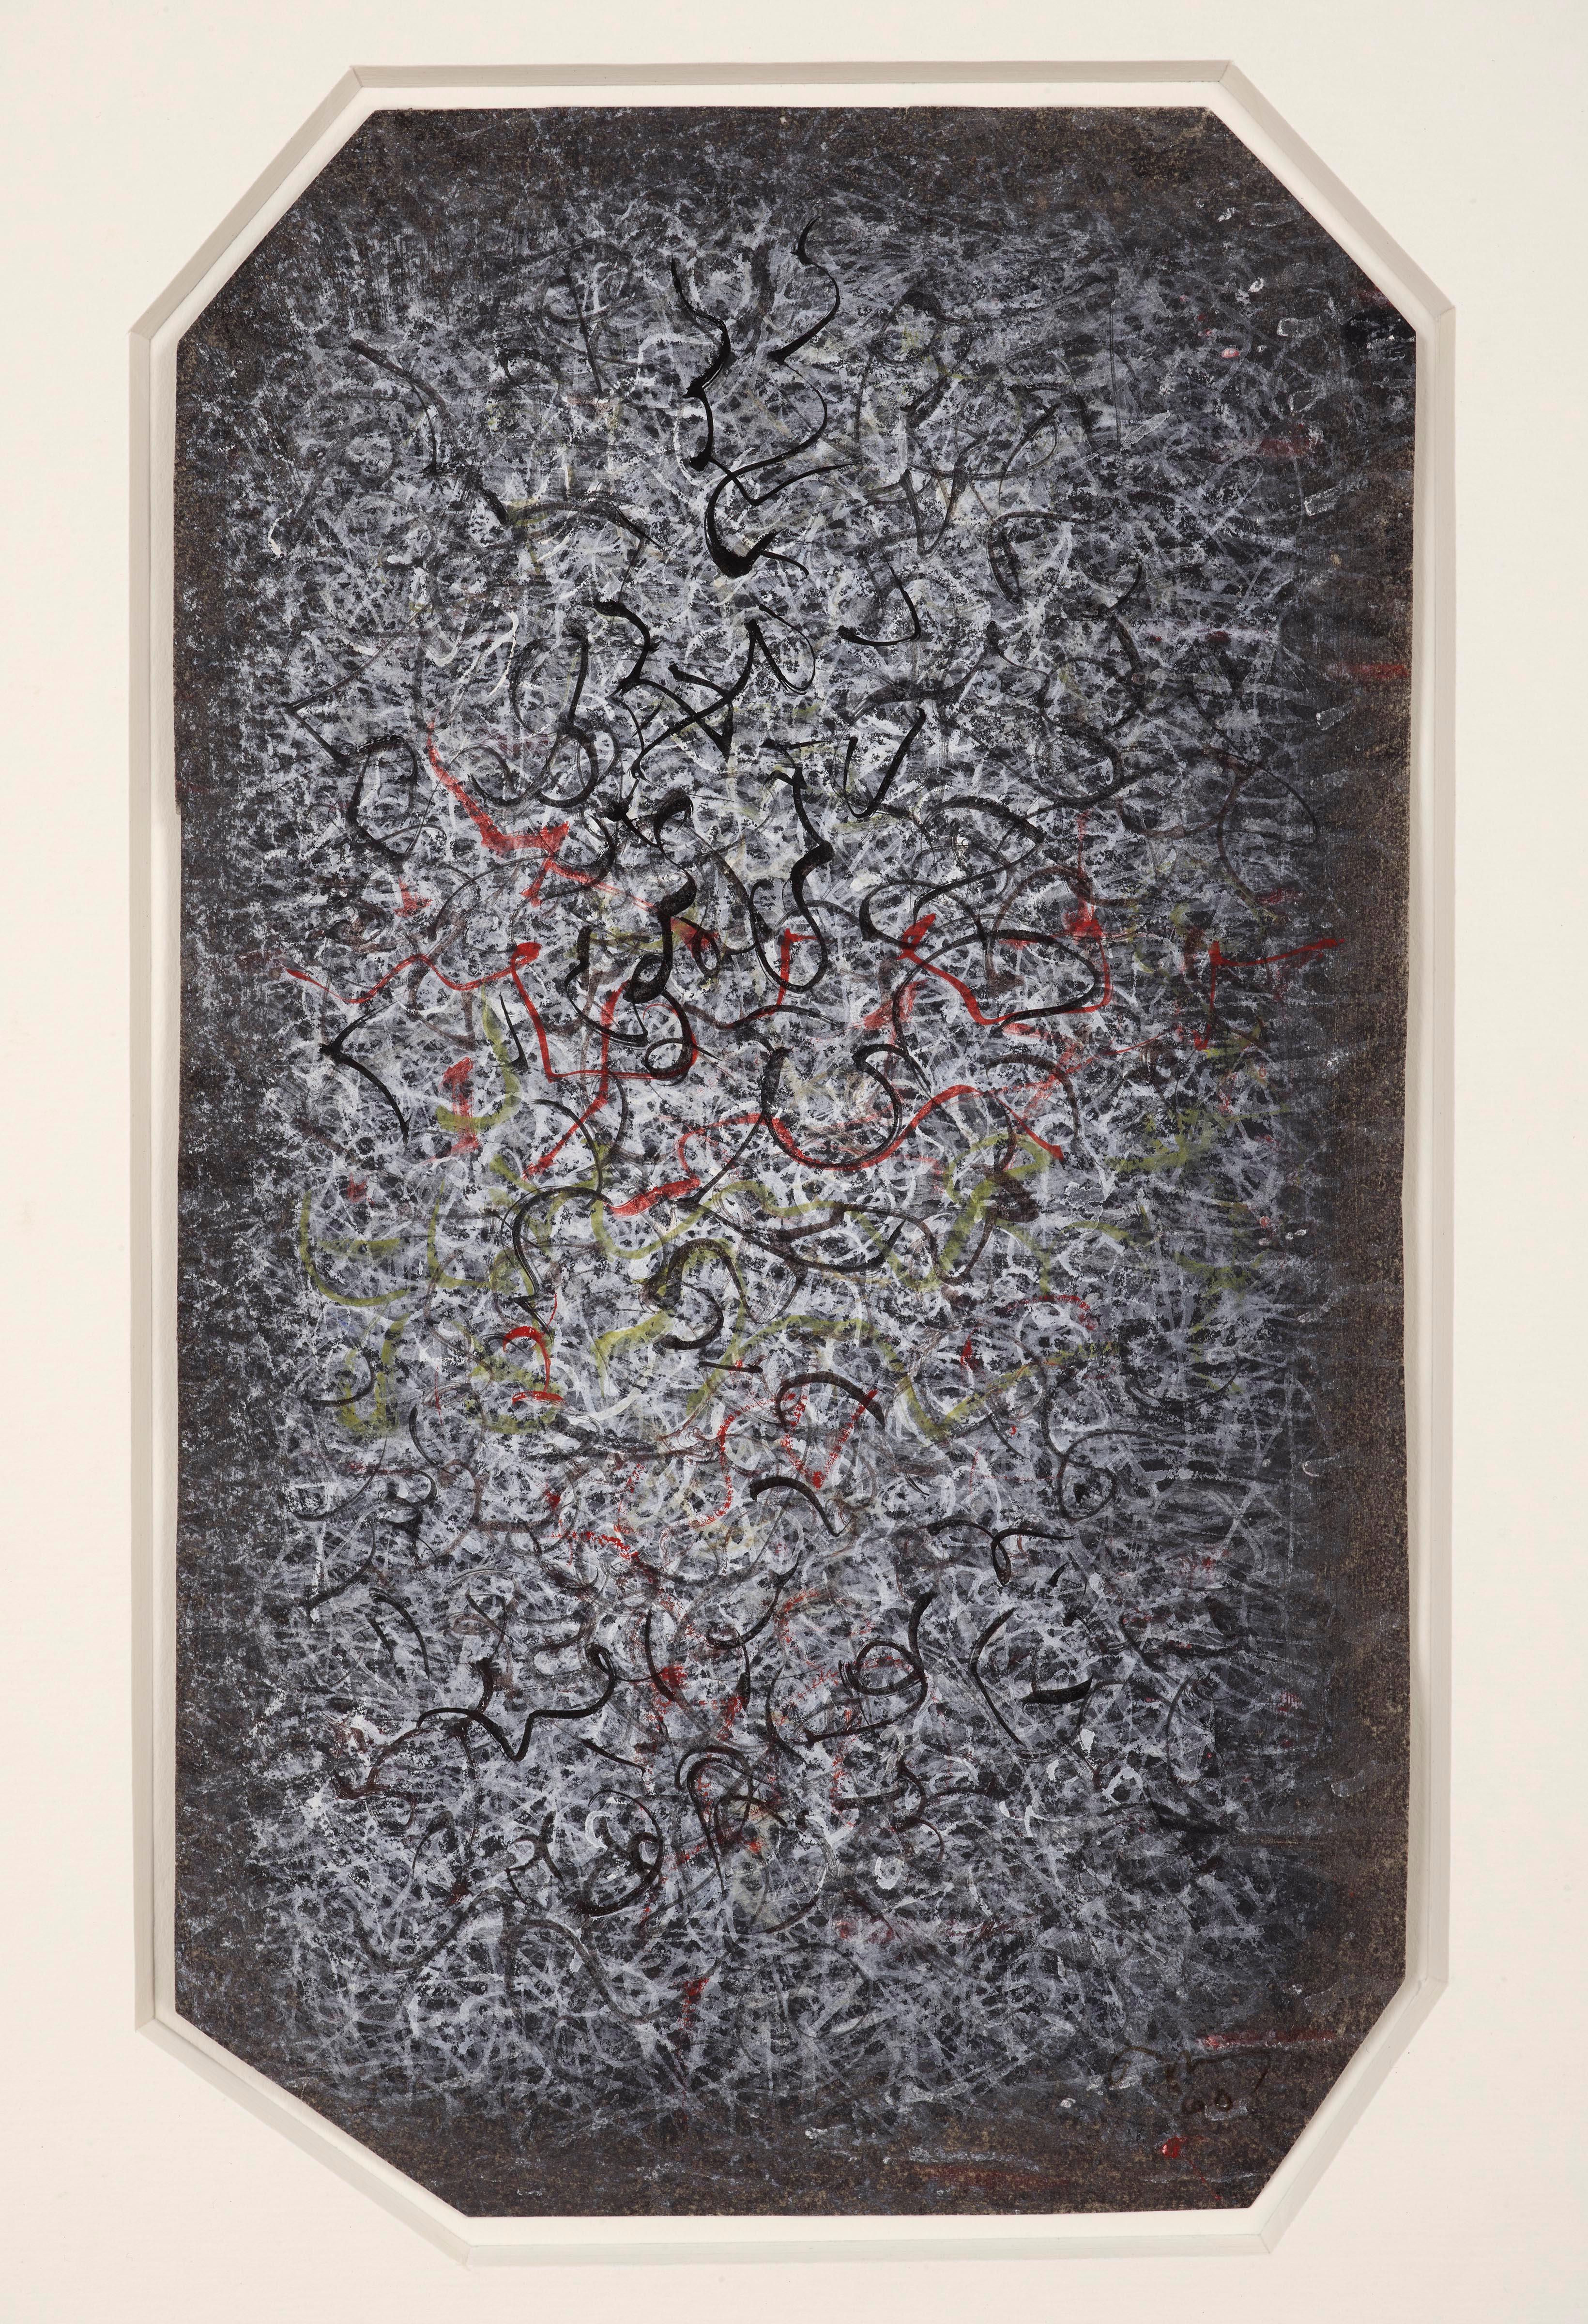 Mark Tobey
Les Petites Signes, 1960
tempera on paper
28 x 16.5 cm
11 1/8 x 6 1/2 in

Provenance:
Seligmann Collection, Seattle
Karl Ströher, Darmstadt (acquired from the above in 1962)
Thence by descent to the present owner
